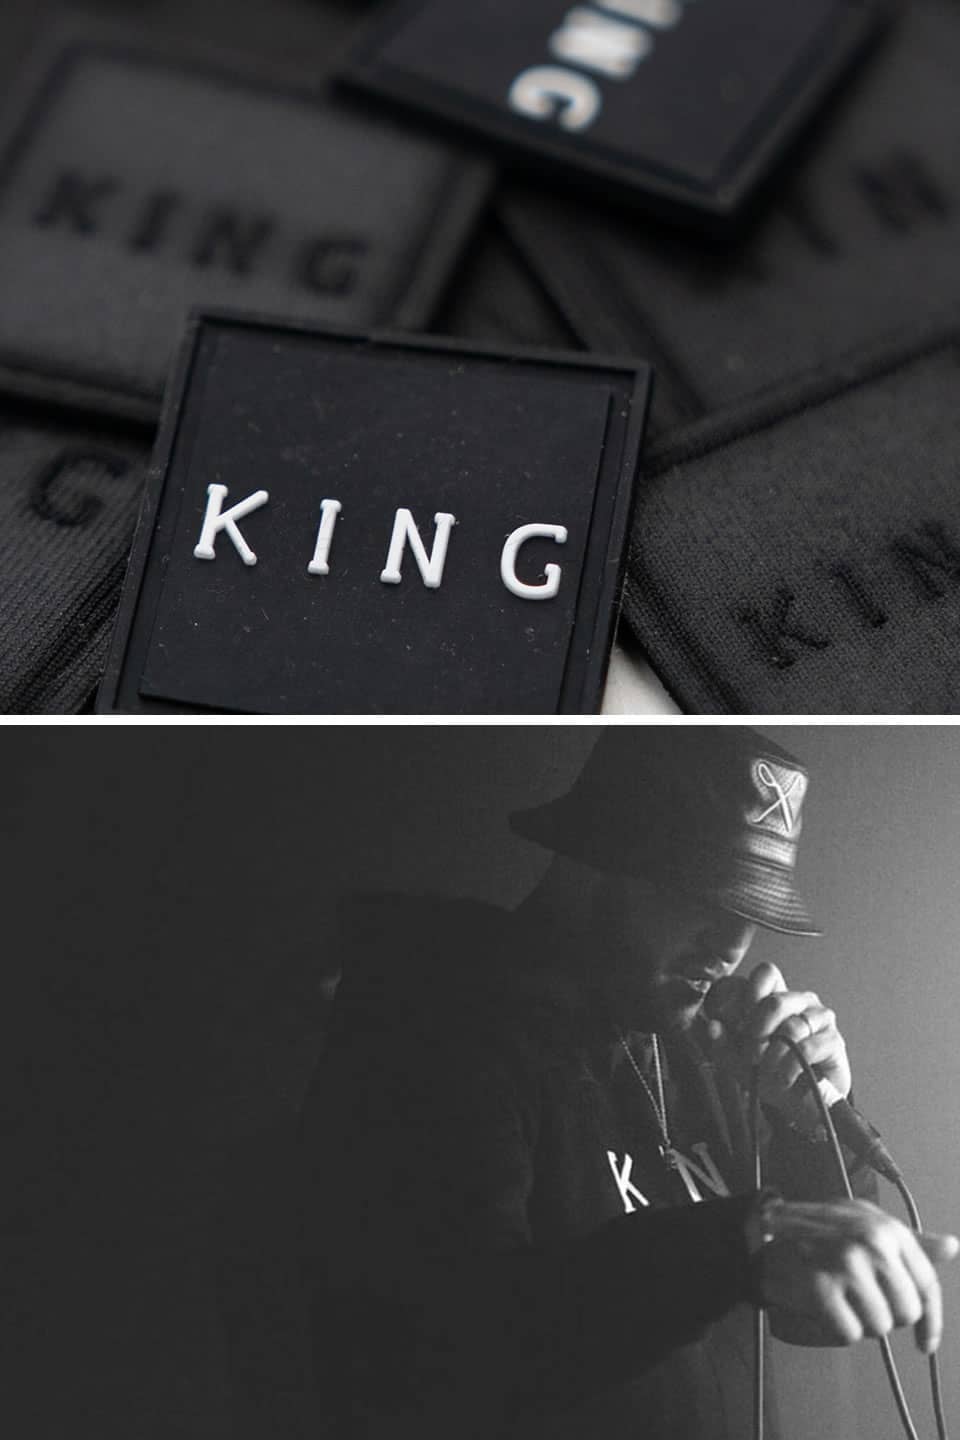 King Apparel labels and emcee wearing bucket hat